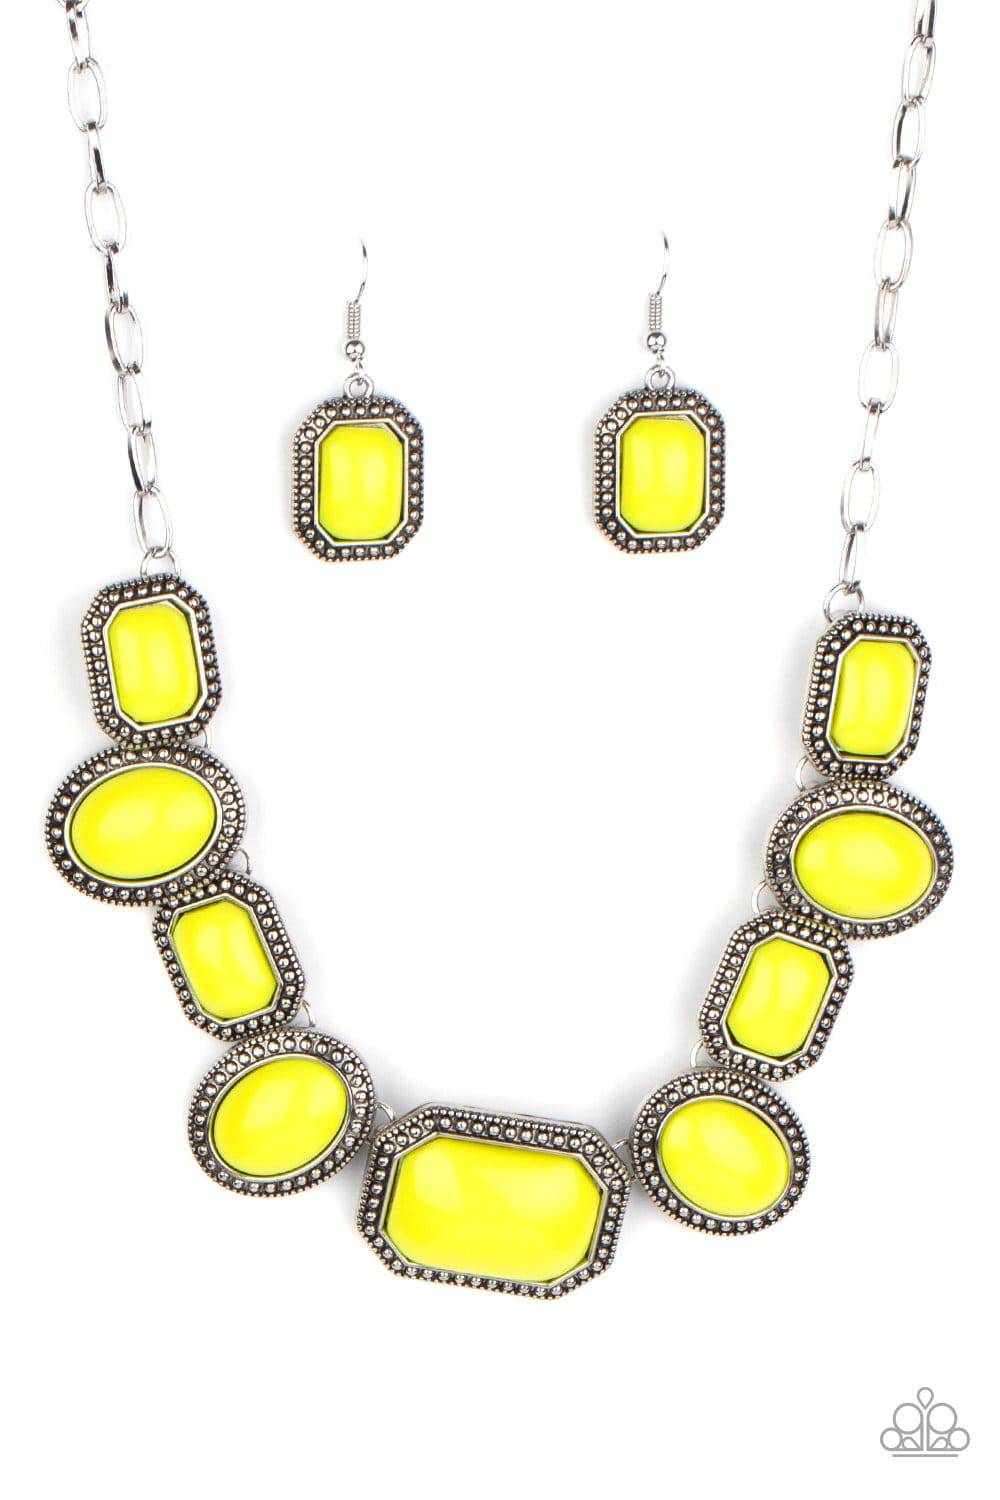 Lets Get Loud - Neon Yellow Beaded Necklace - Paparazzi Accessories - GlaMarous Titi Jewels